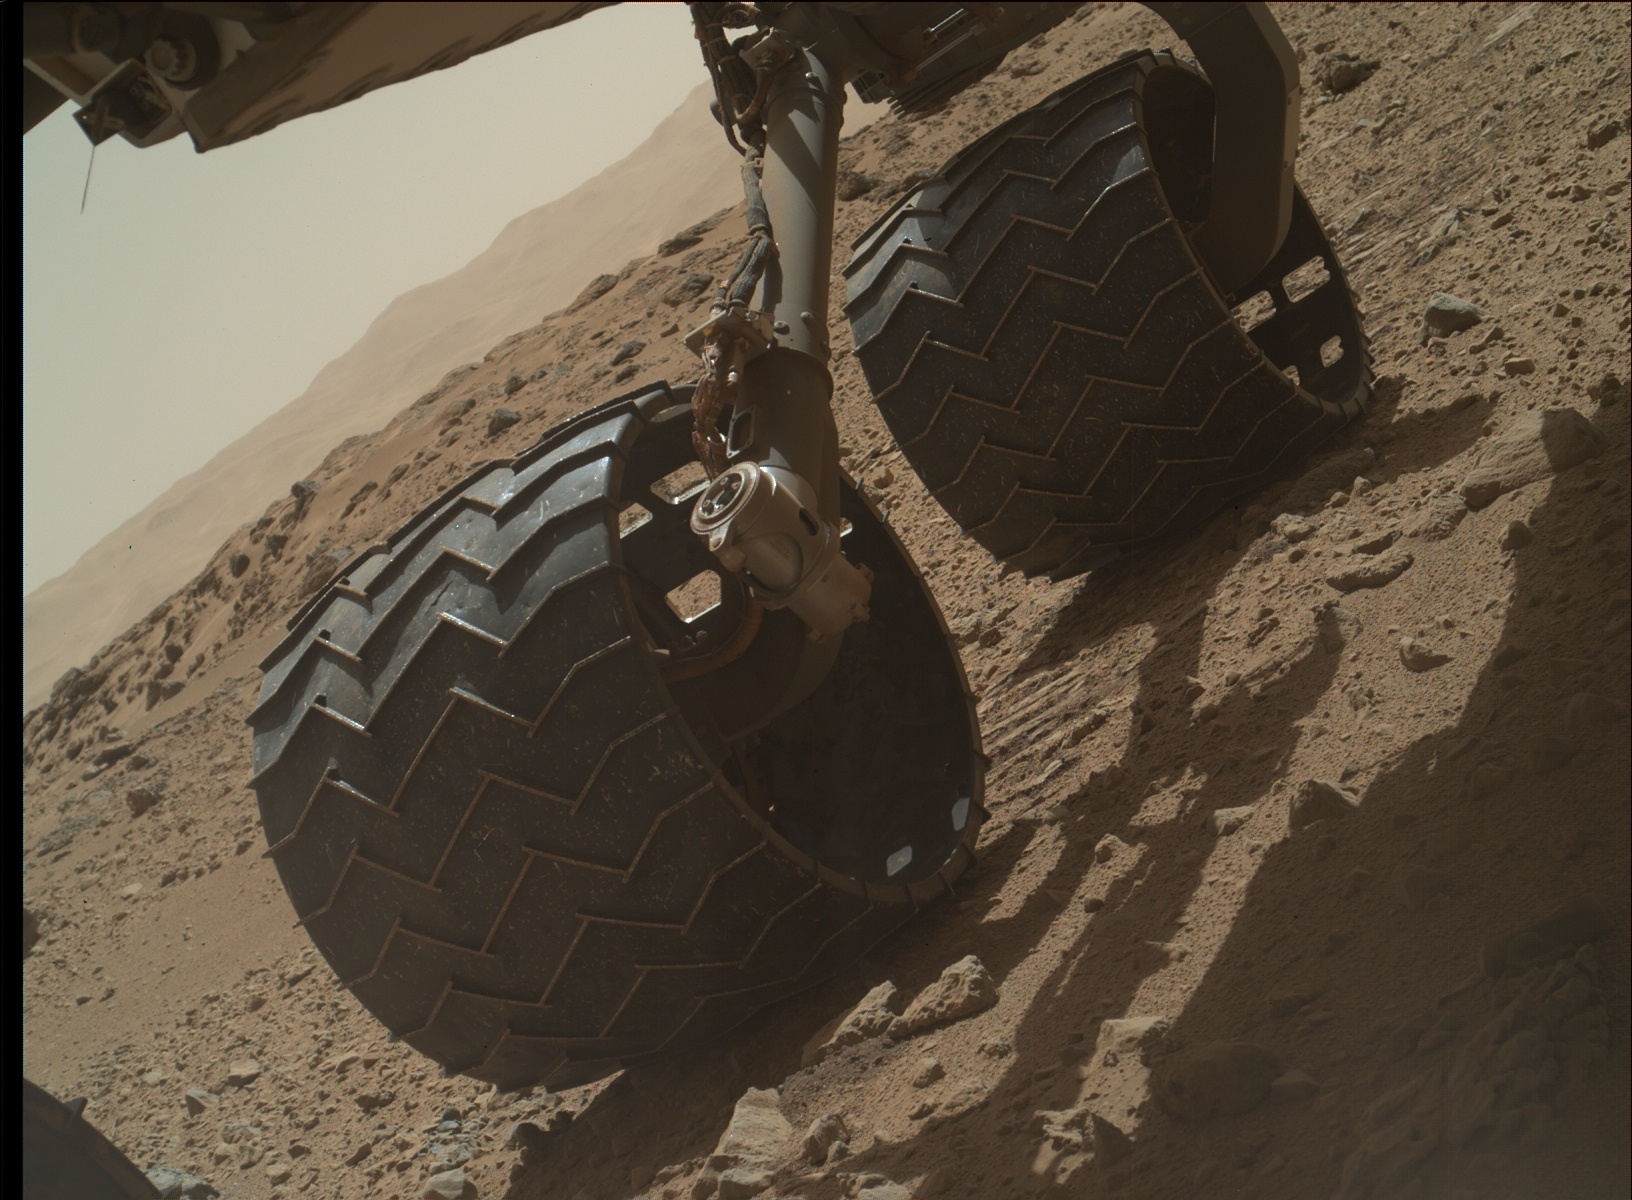 Nasa's Mars rover Curiosity acquired this image using its Mars Hand Lens Imager (MAHLI) on Sol 552